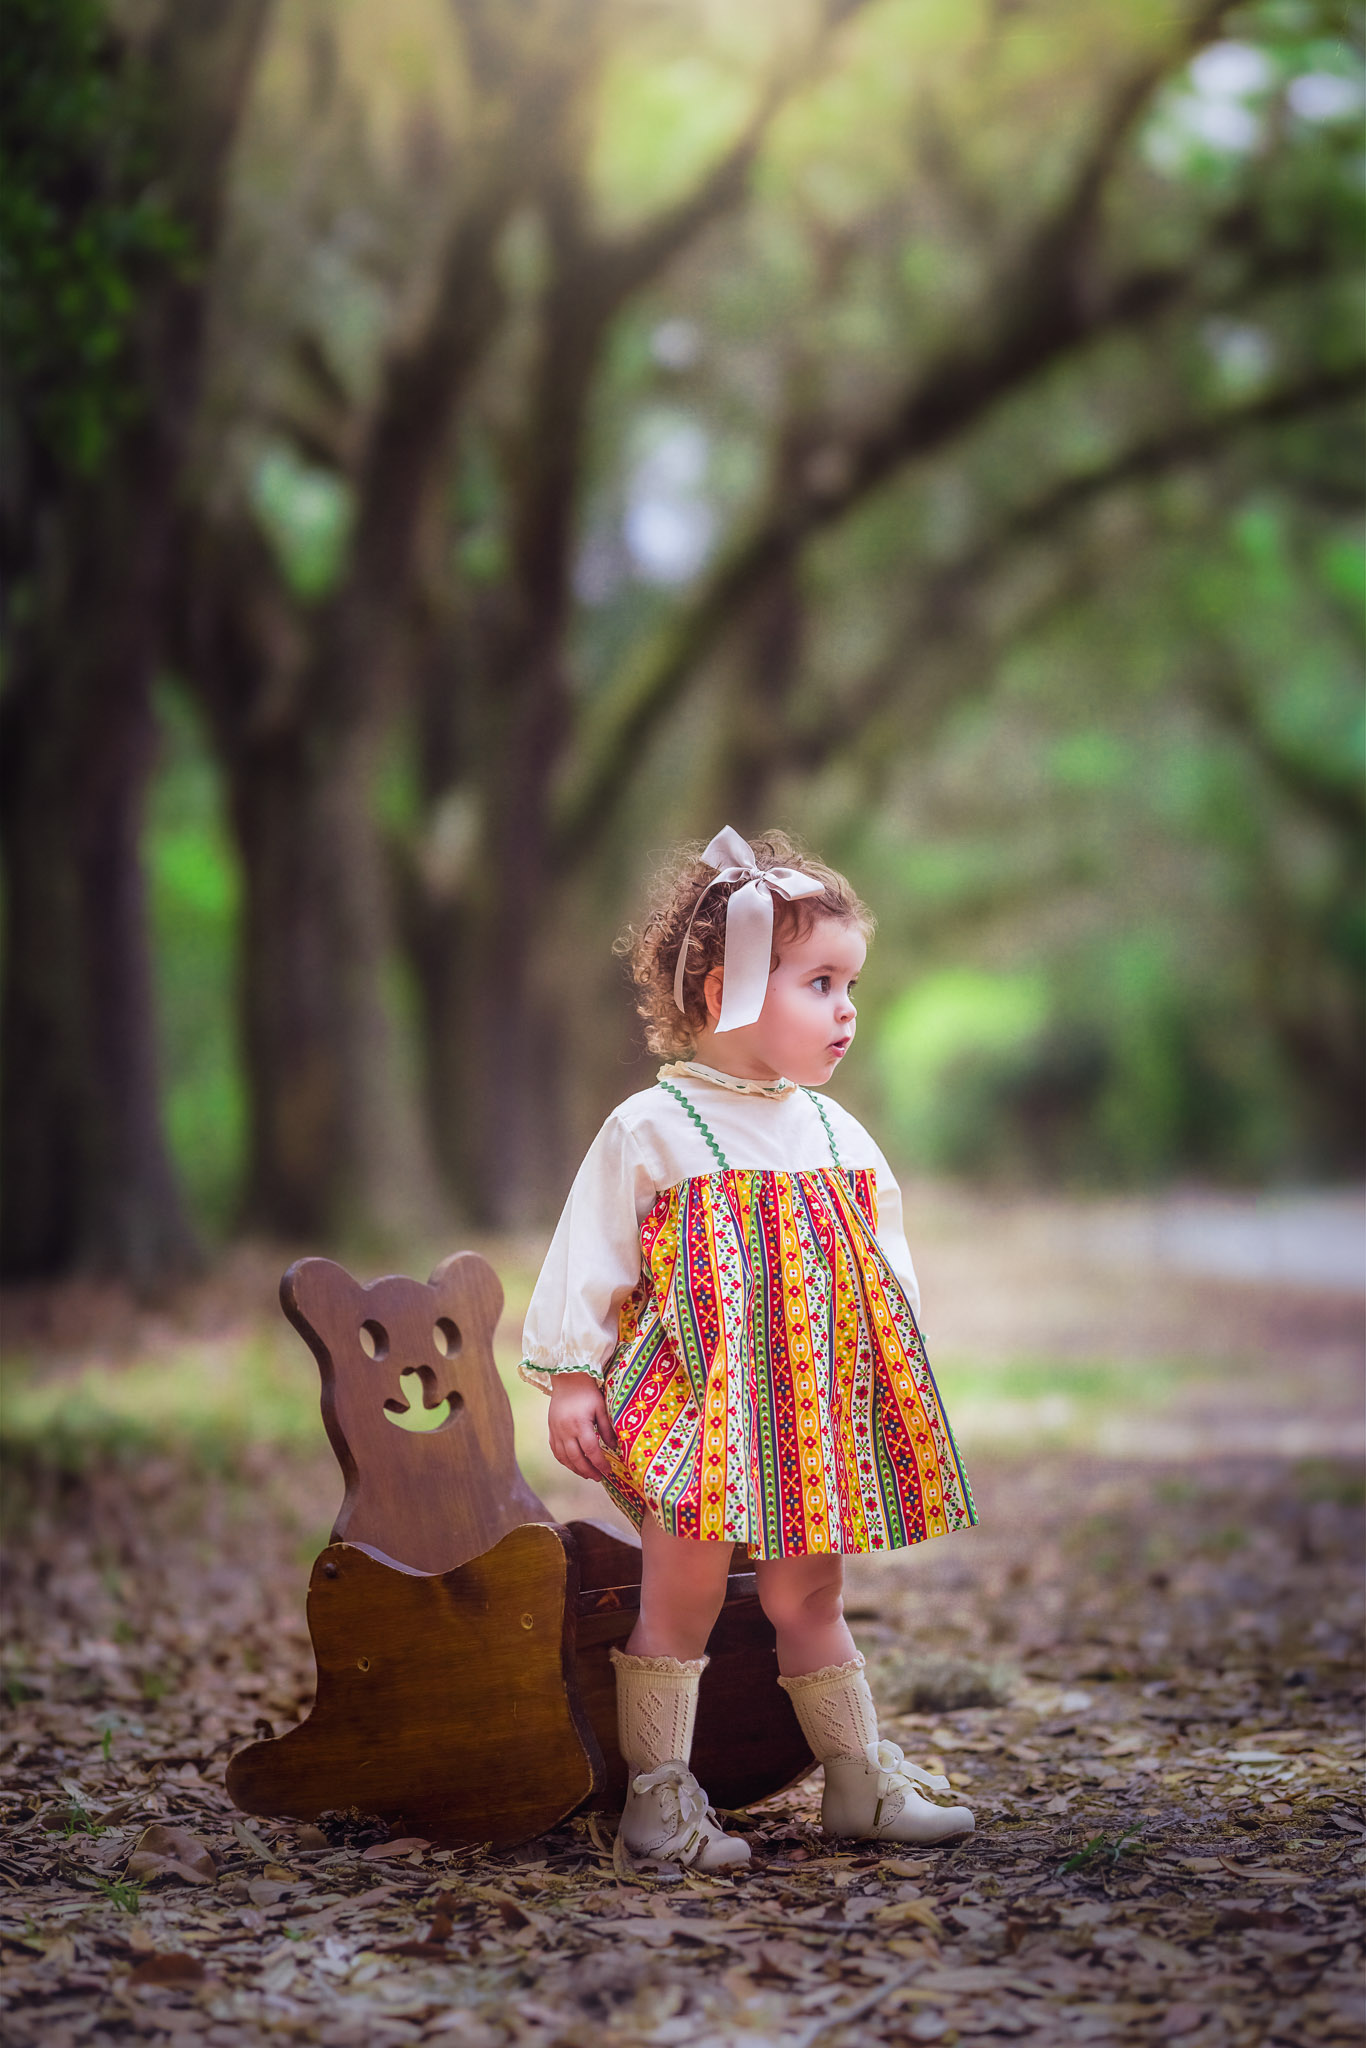 A young girl in a colorful patterned dress and high socks stands in a park in front of a wooden teddy bear chair raleigh preschools